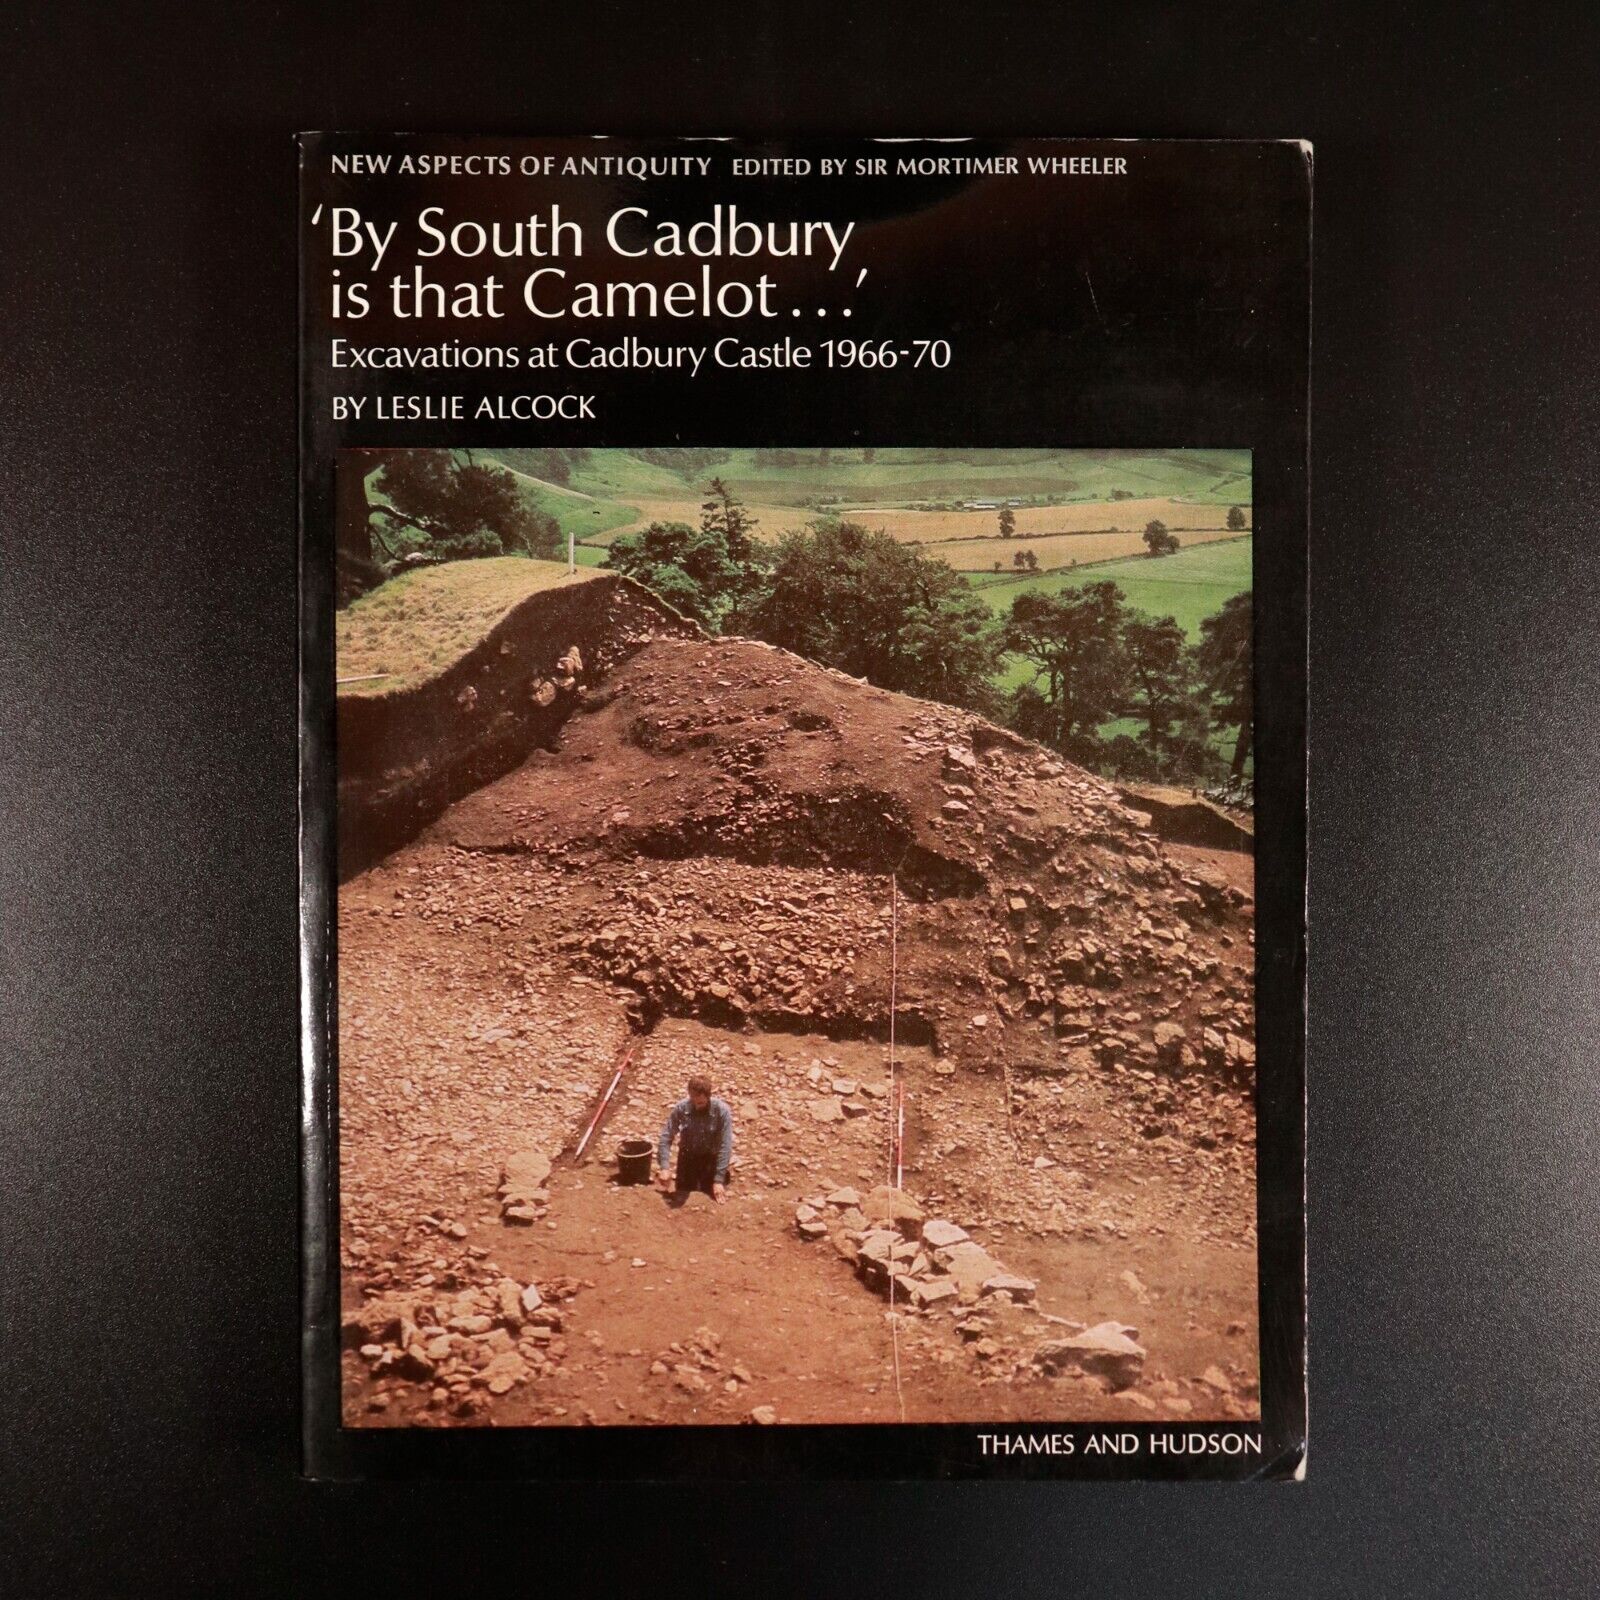 1972 Excavations At Cadbury Castle by Leslie Alcock British Archaeology Book